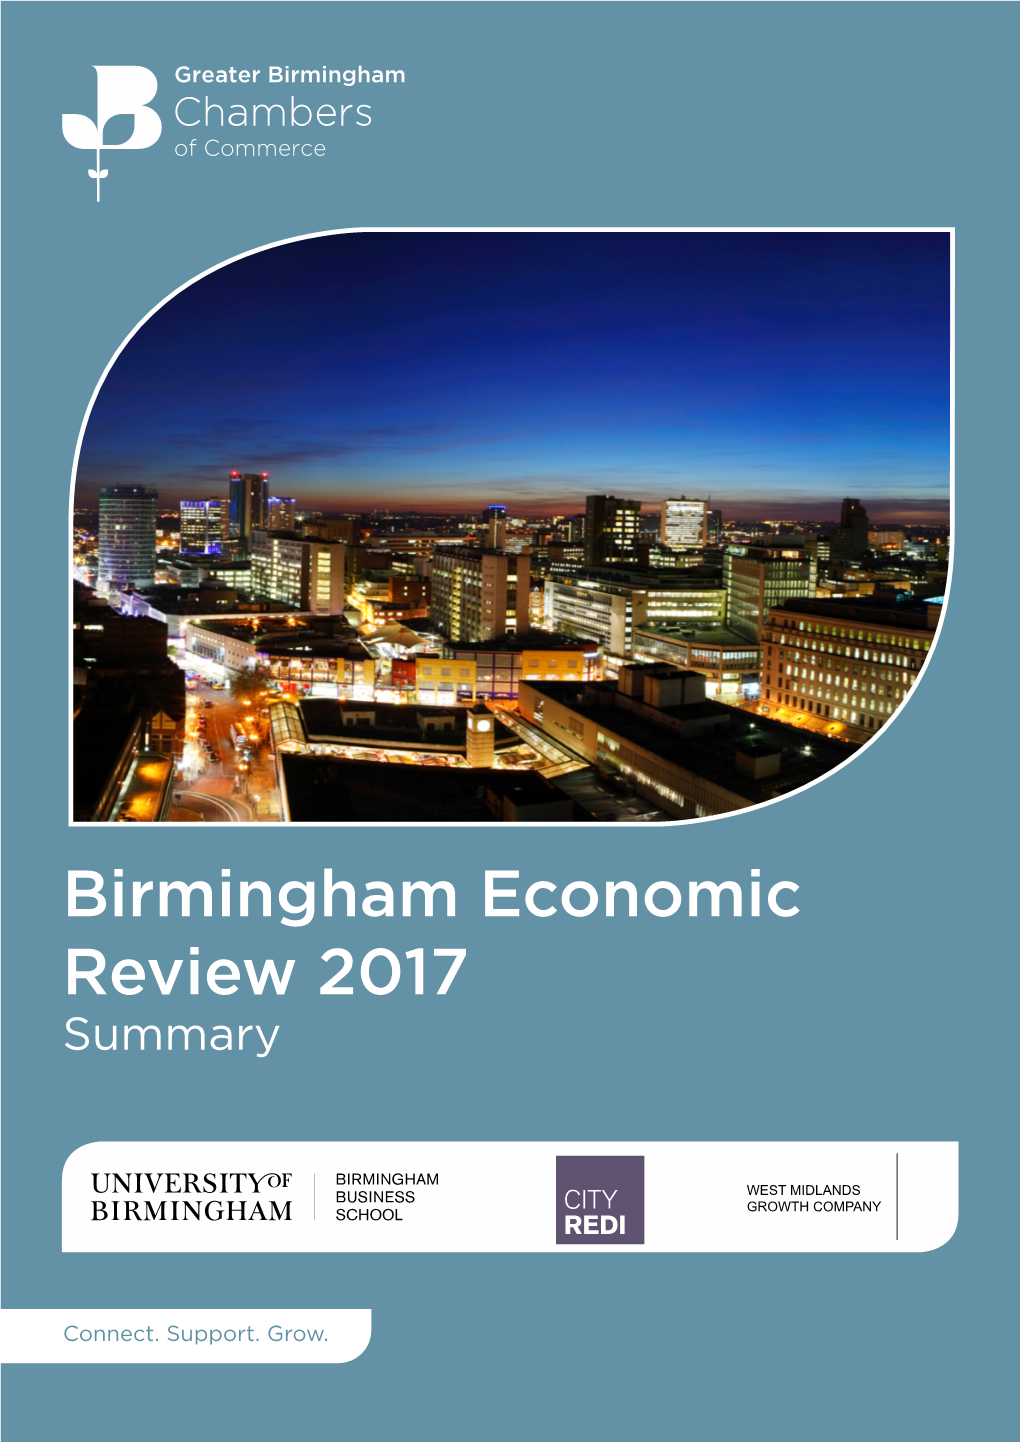 Download a Summary of the Birmingham Economic Review 2017